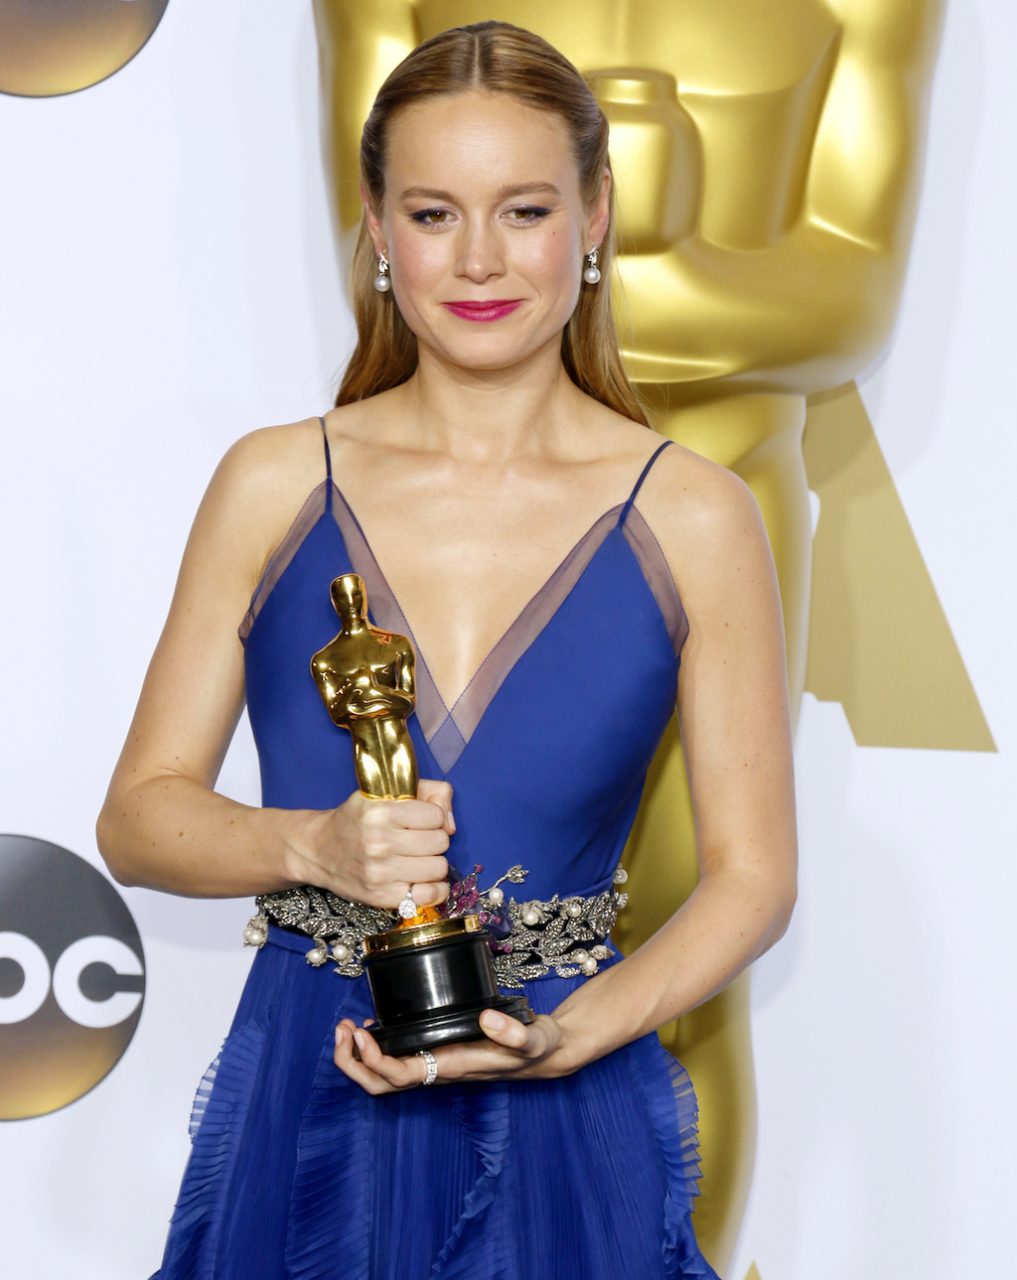 Larson won an Oscar in 2016 for her role in Room. Photo credit: Shutterstock.com